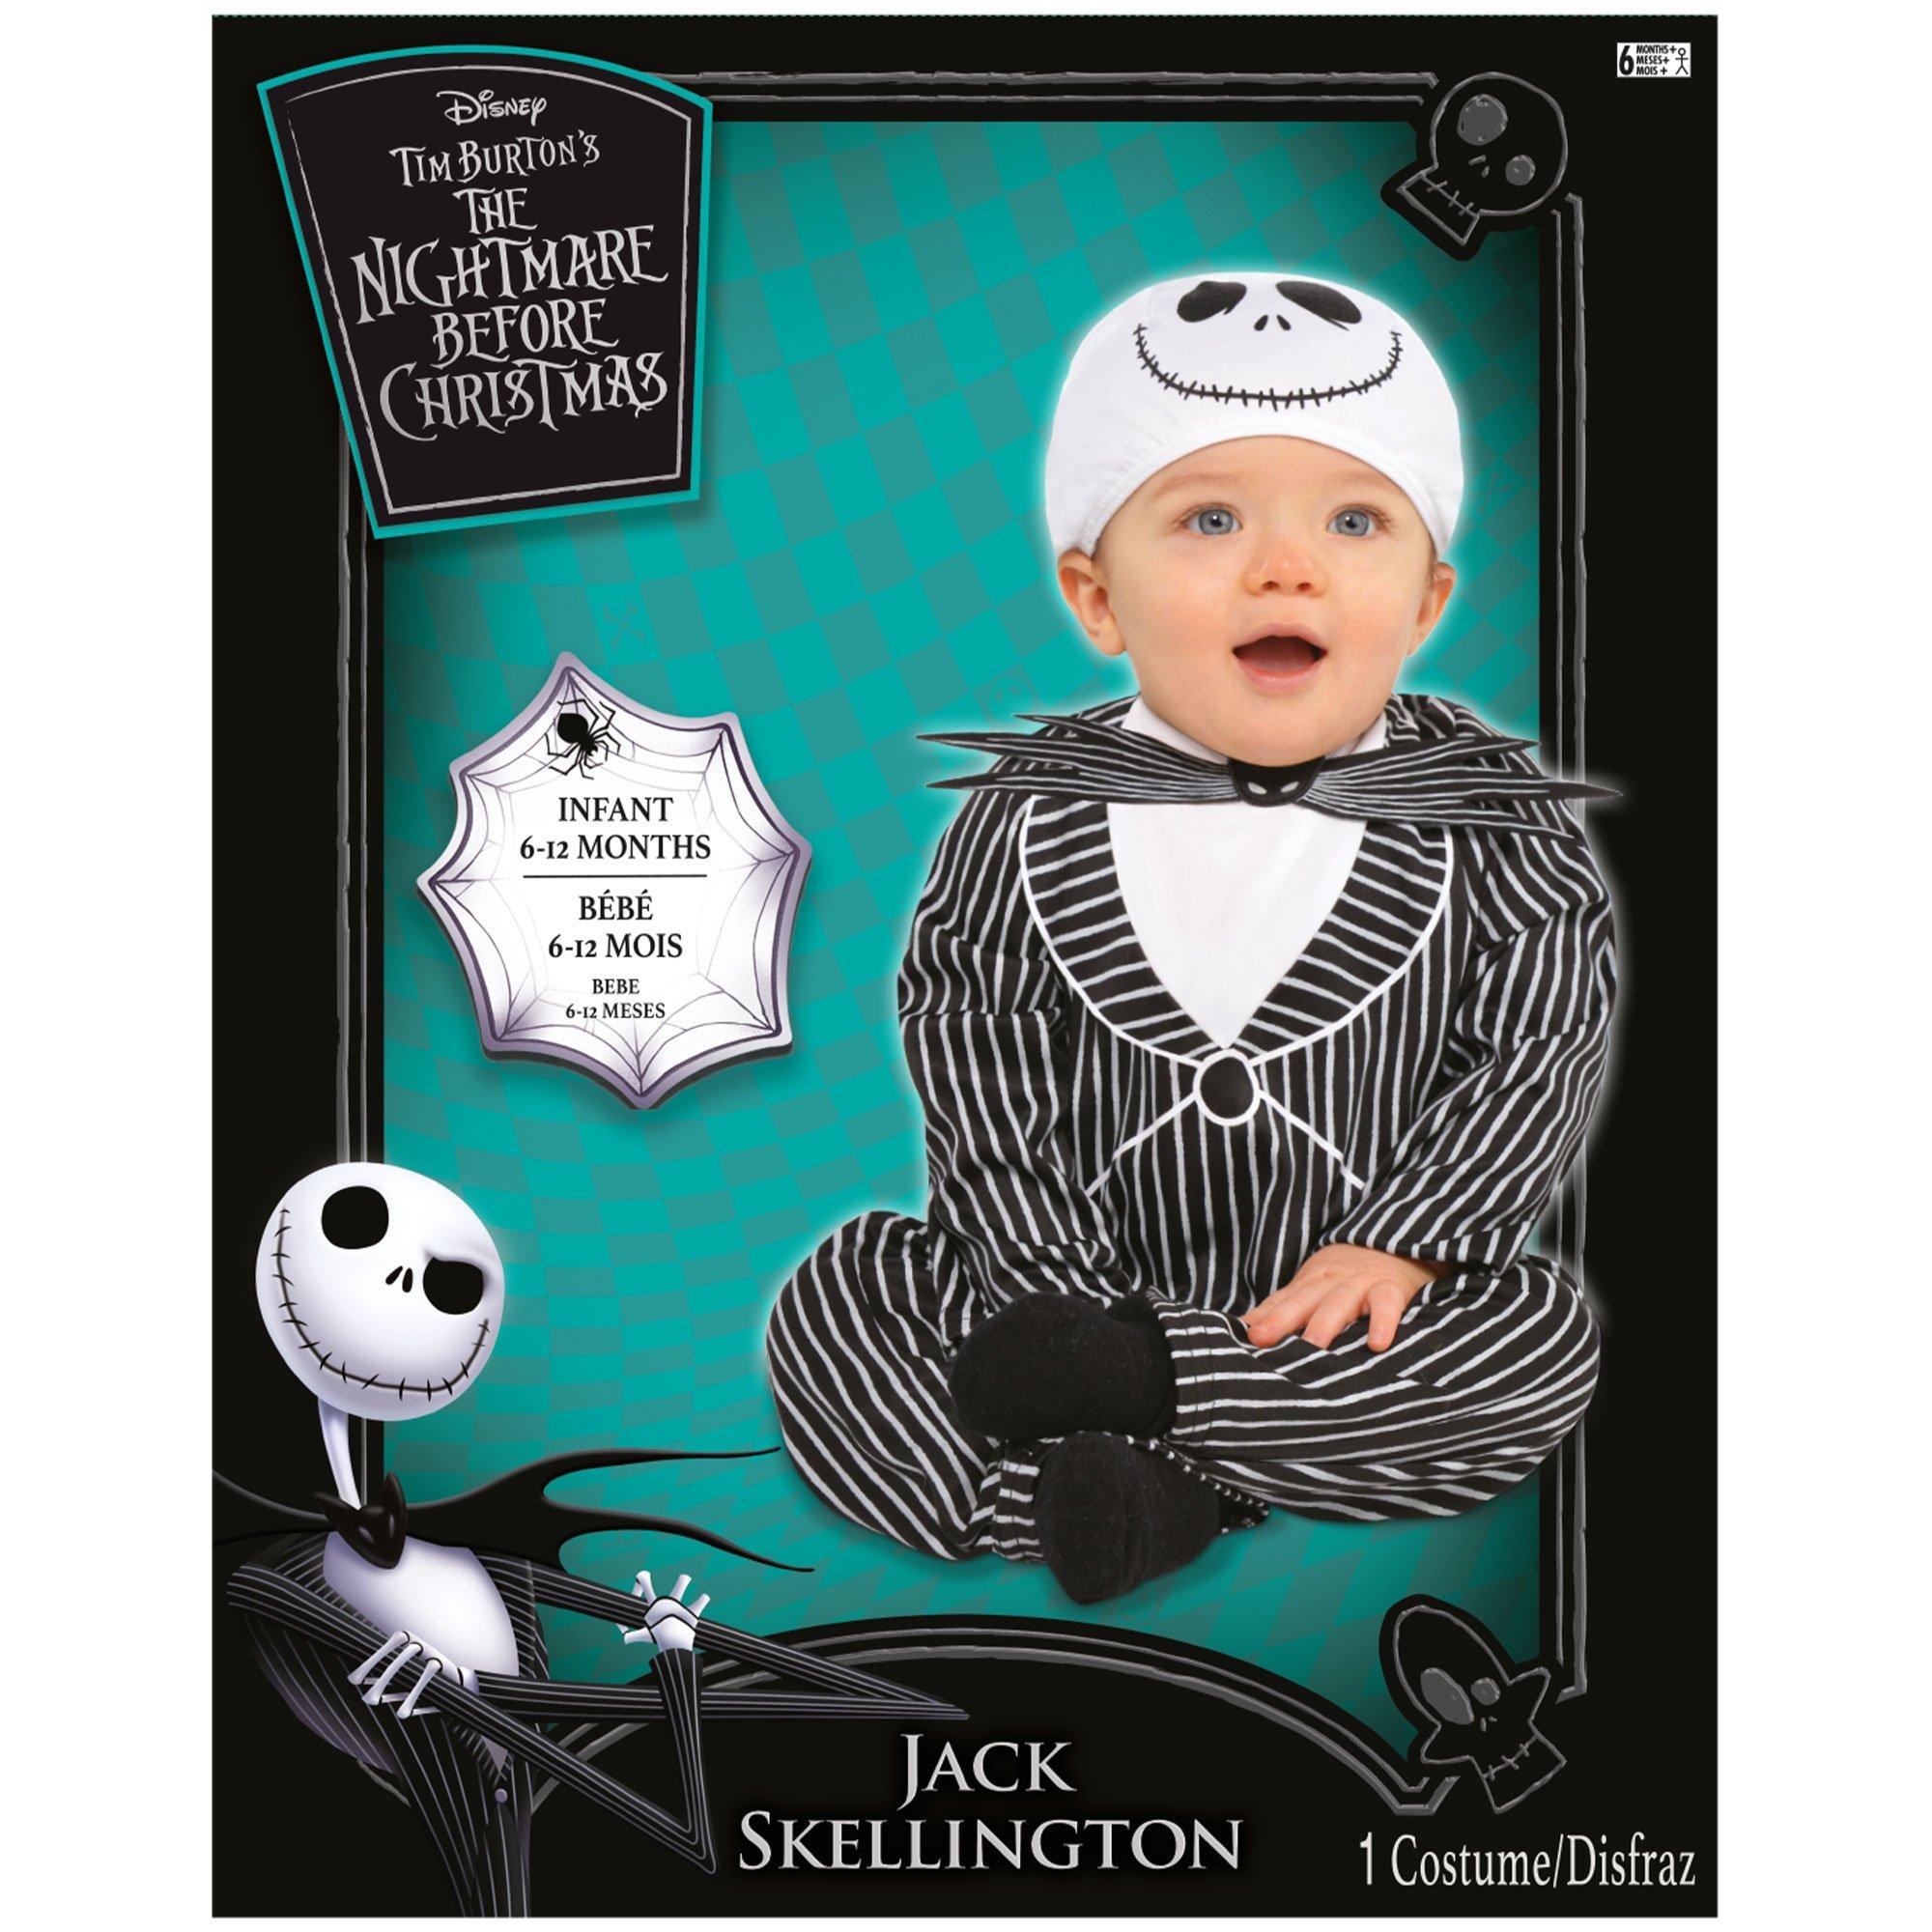 Baby Jack Skellington Costume - The Nightmare Before Christmas | Party City